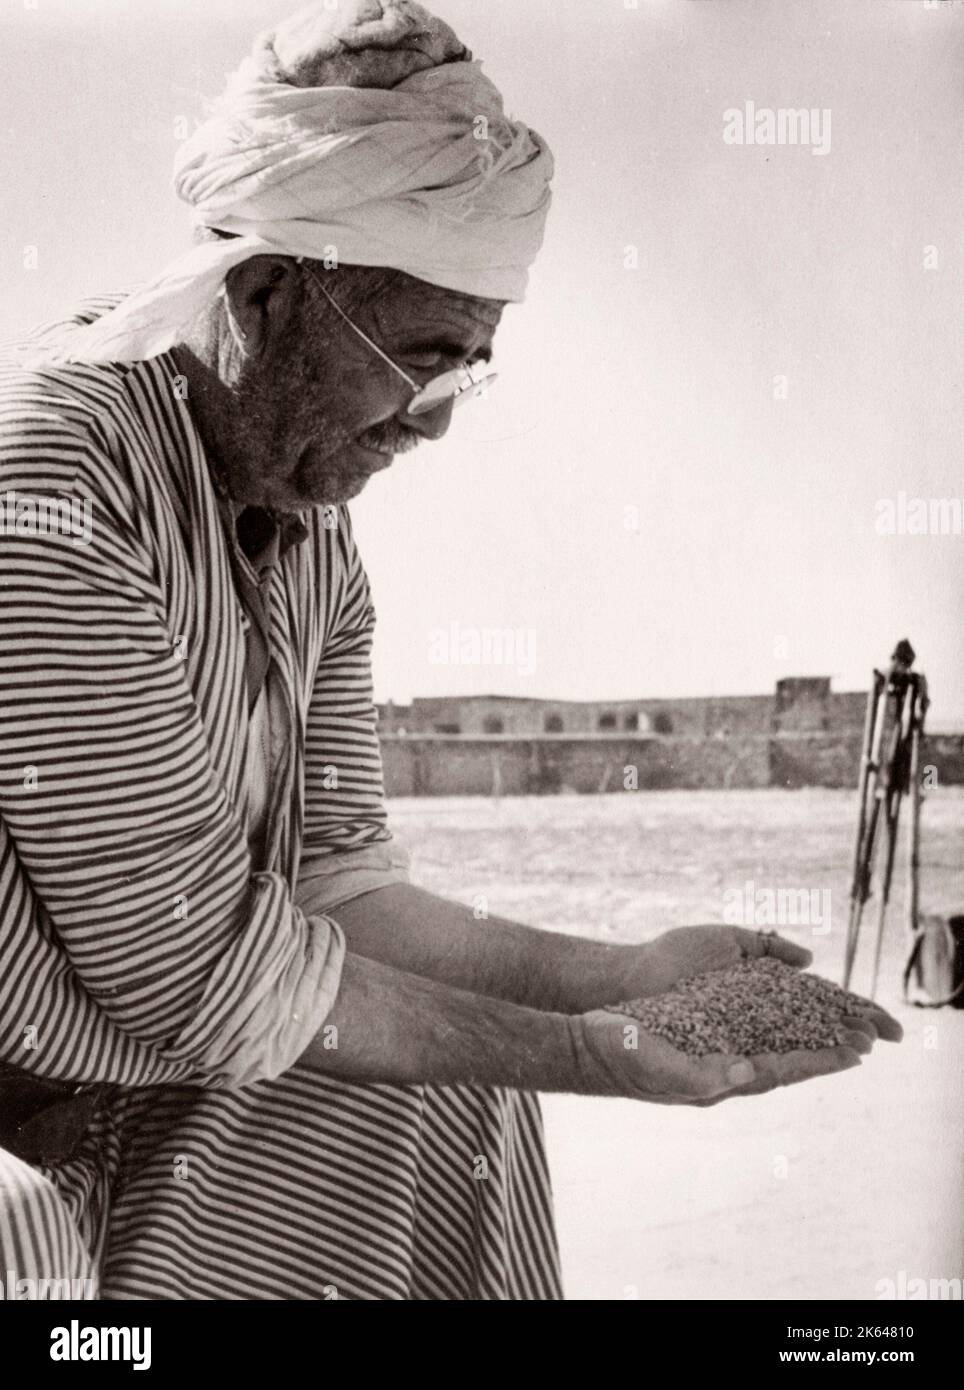 1943 - Syria - Homs - a man grading wheat grain Photograph by a British army recruitment officer stationed in East Africa and the Middle East during World War II Stock Photo